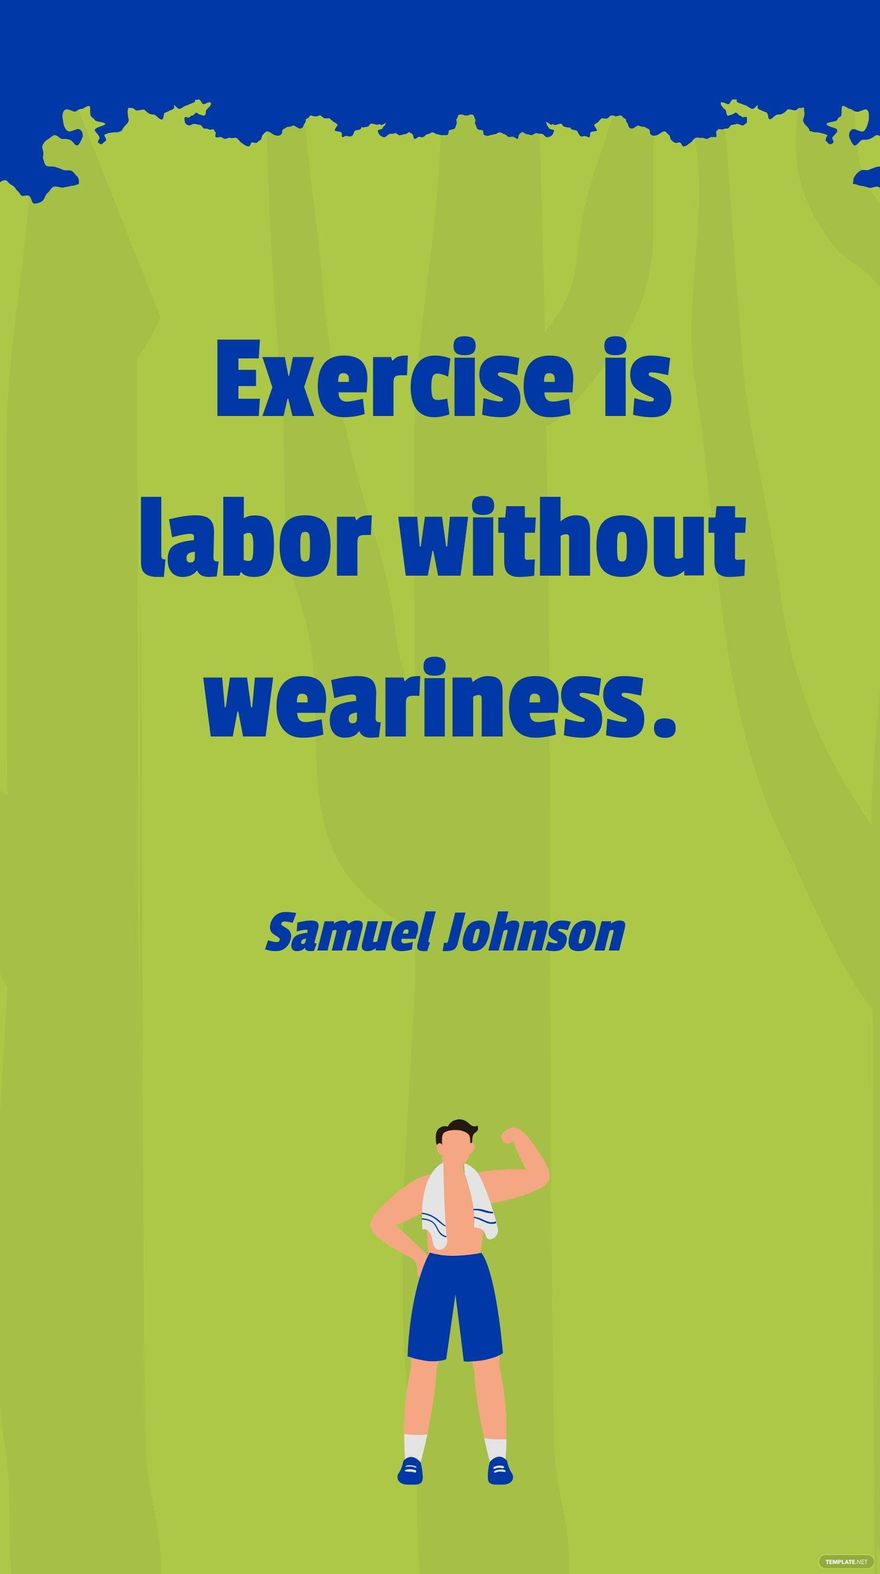 Free Samuel Johnson - Exercise is labor without weariness. in JPG